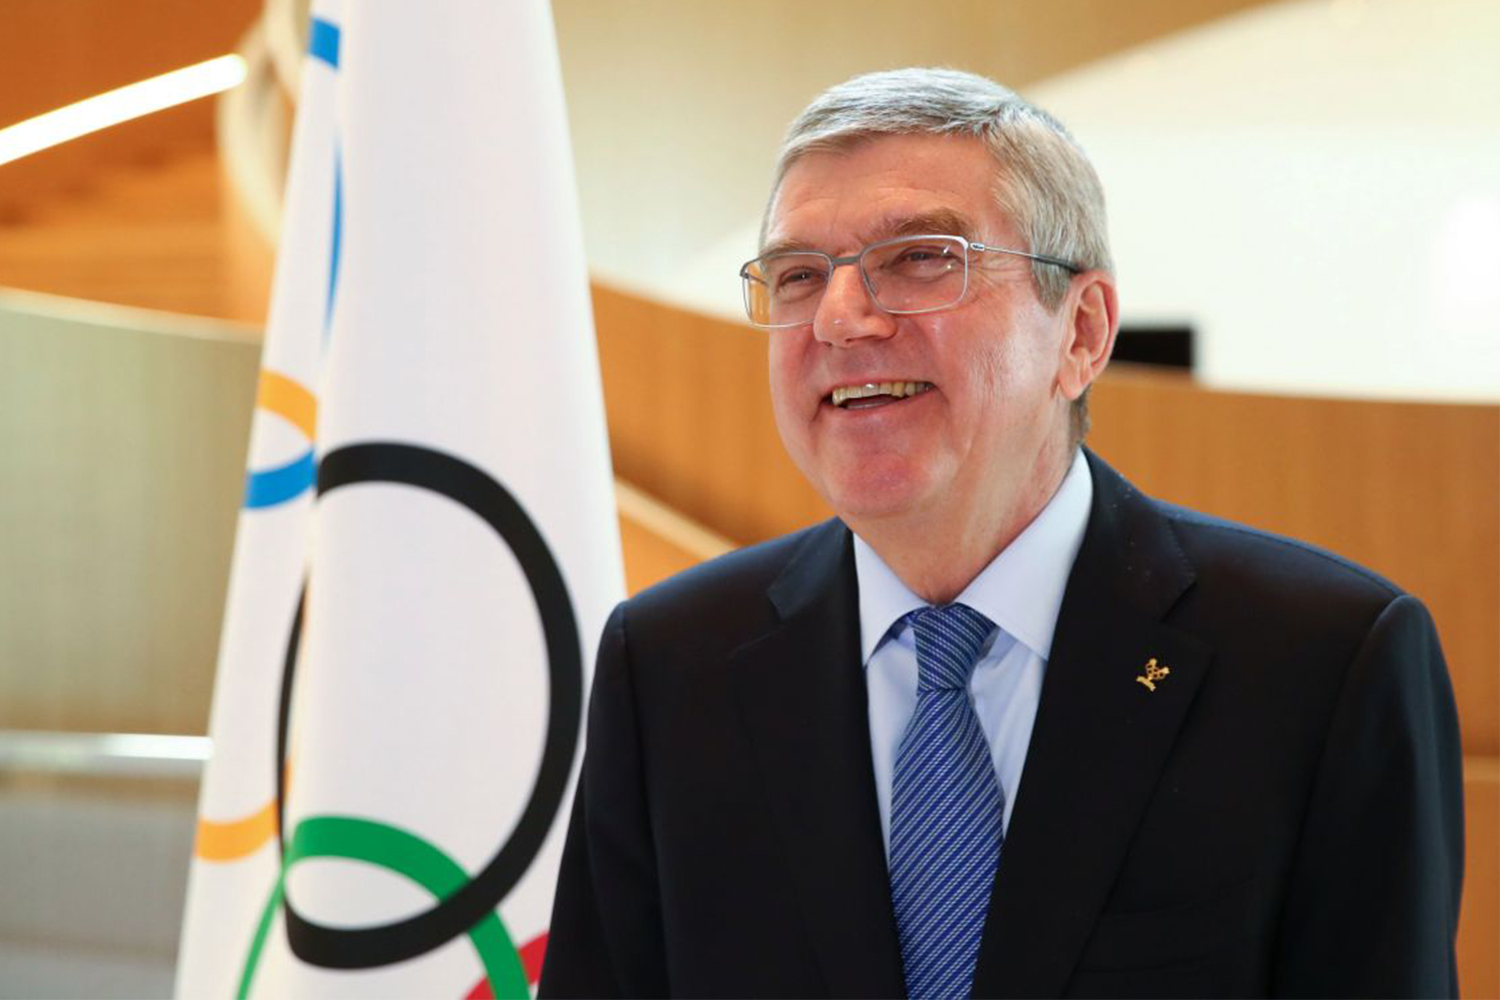 International Olympic Committee president Thomas Bach at a March interview.